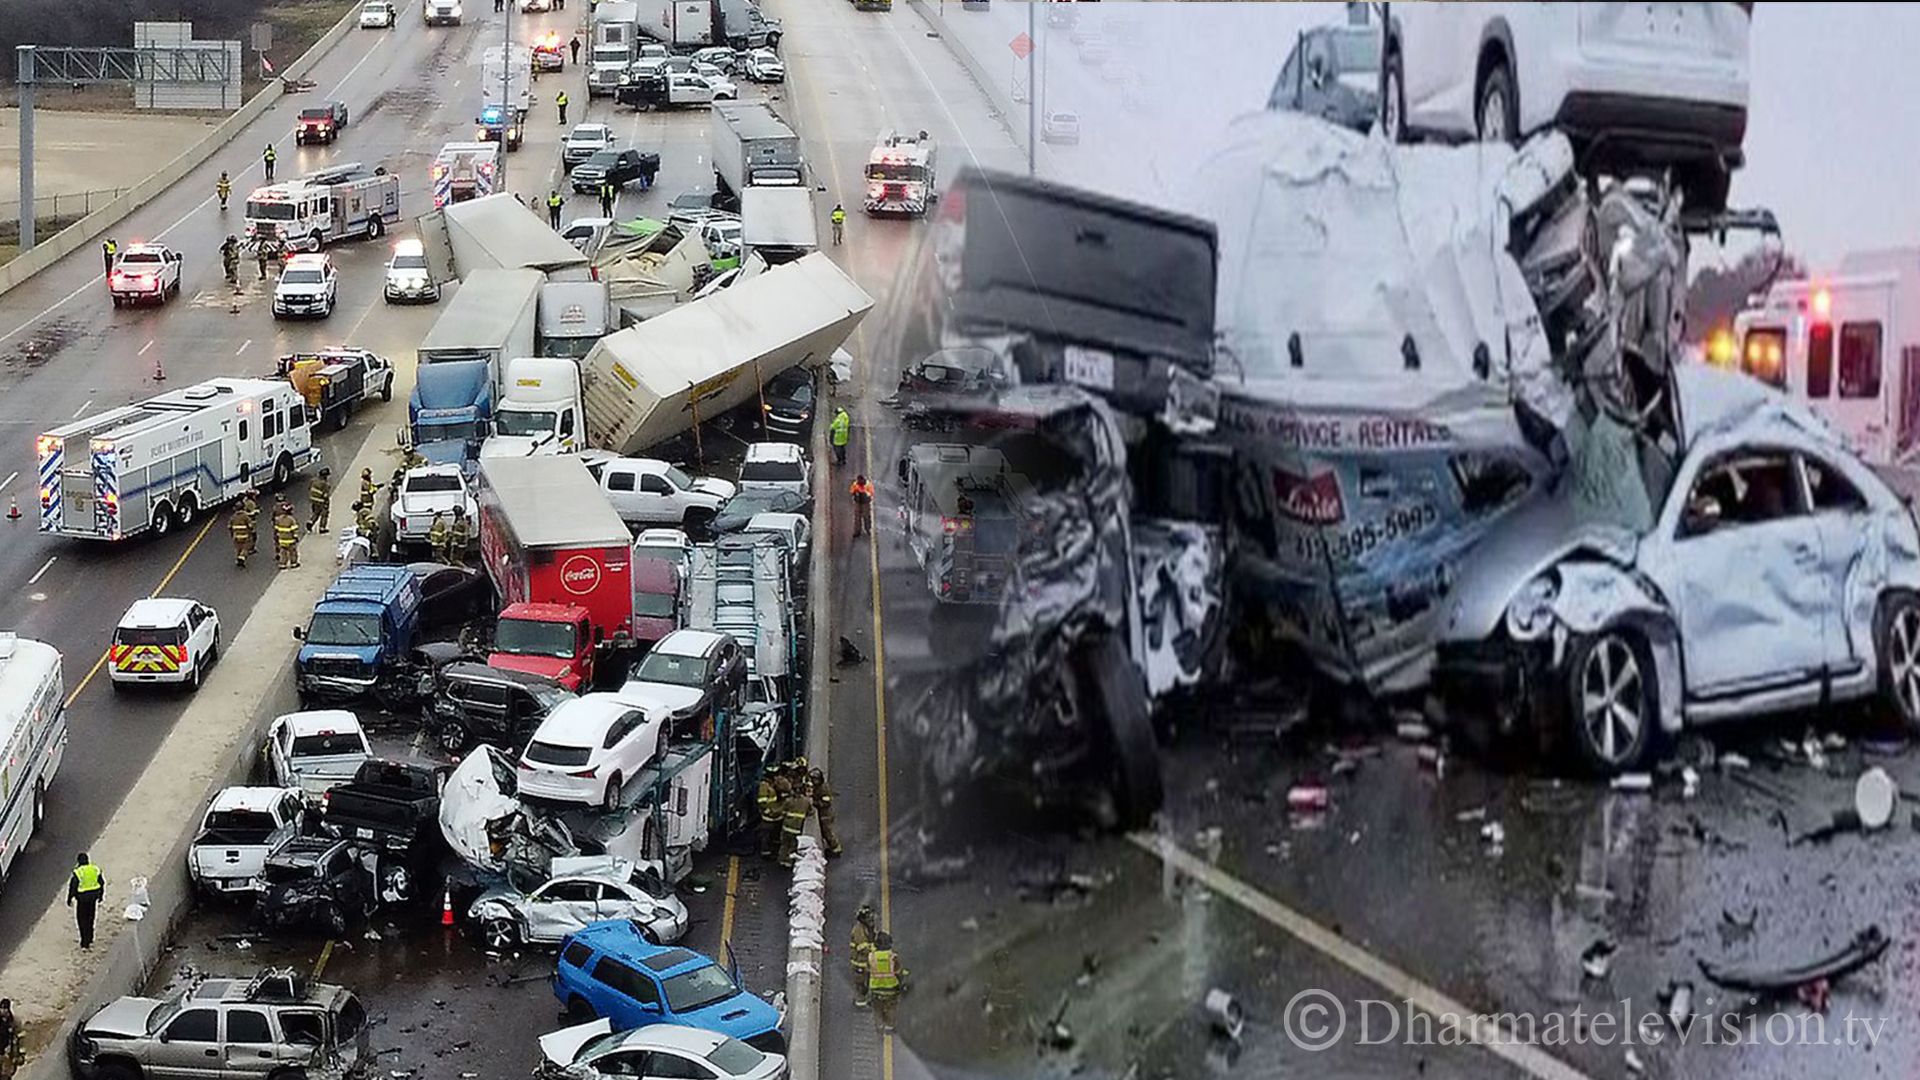 More than 100 road accidents kill 6 in US